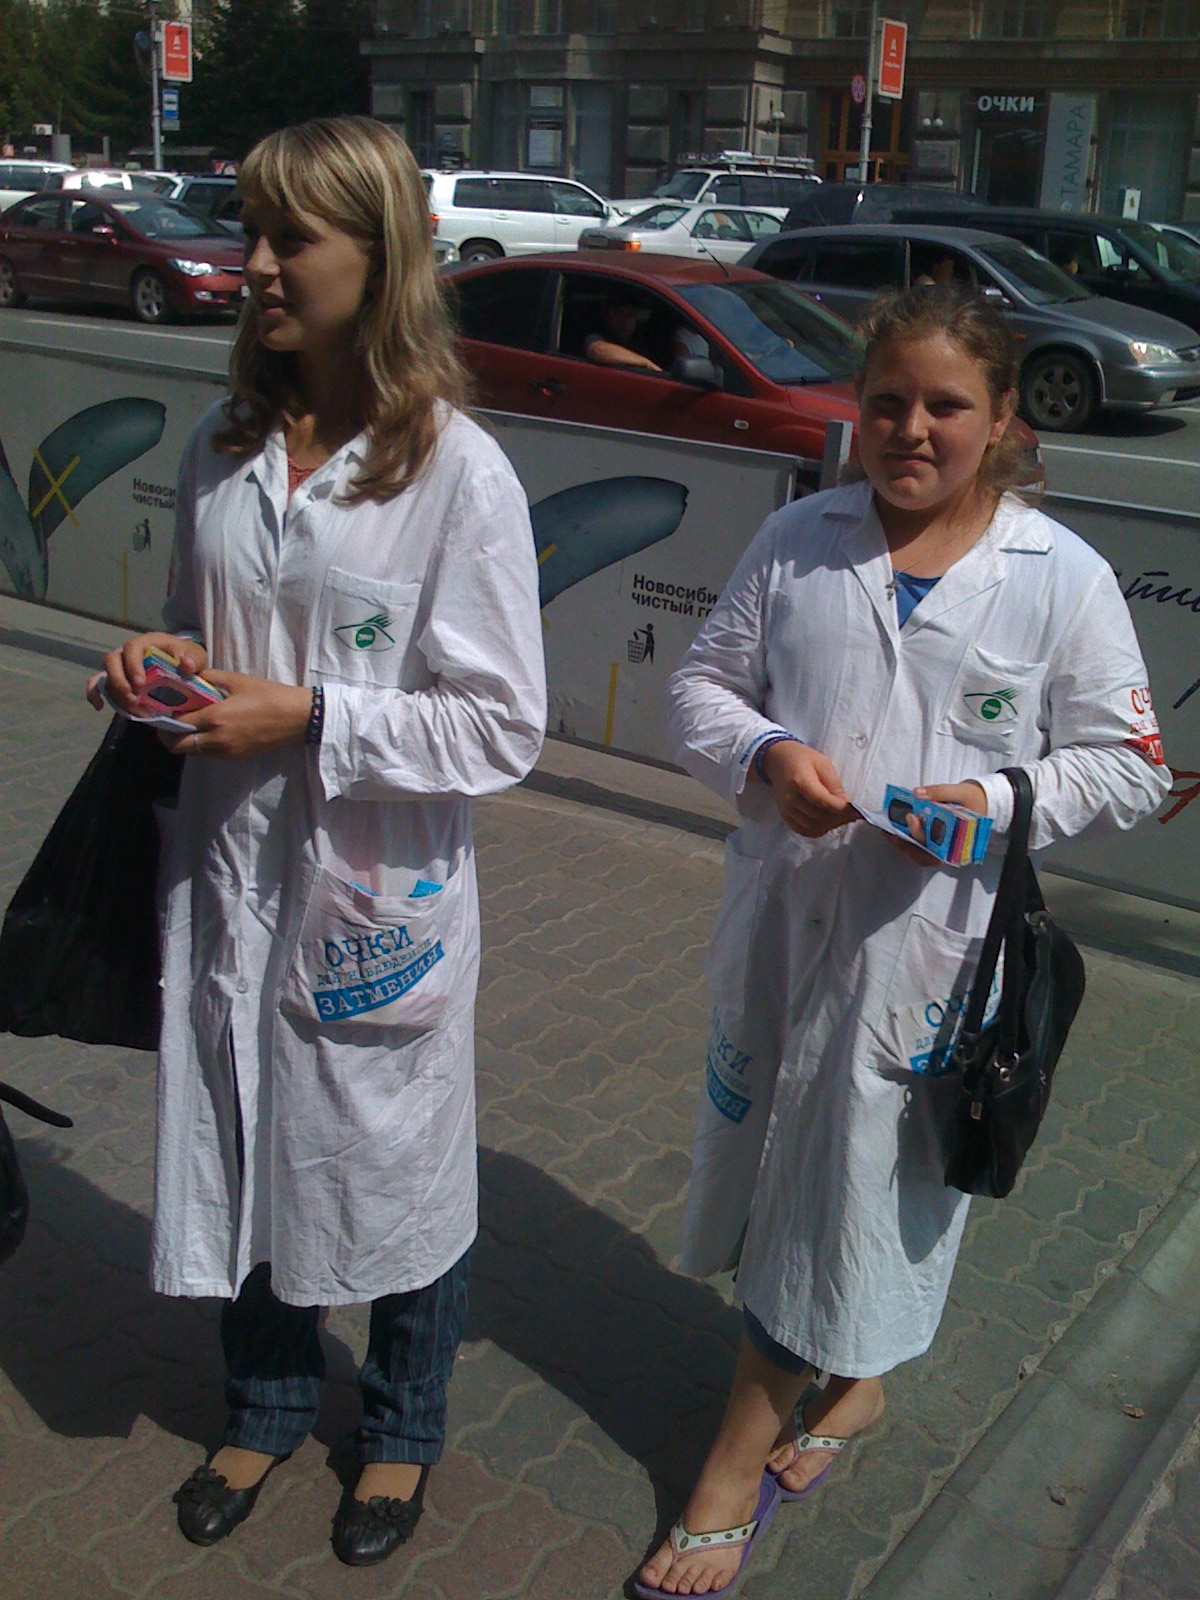 Love these eclipse glasses peddlers lab coat getup!